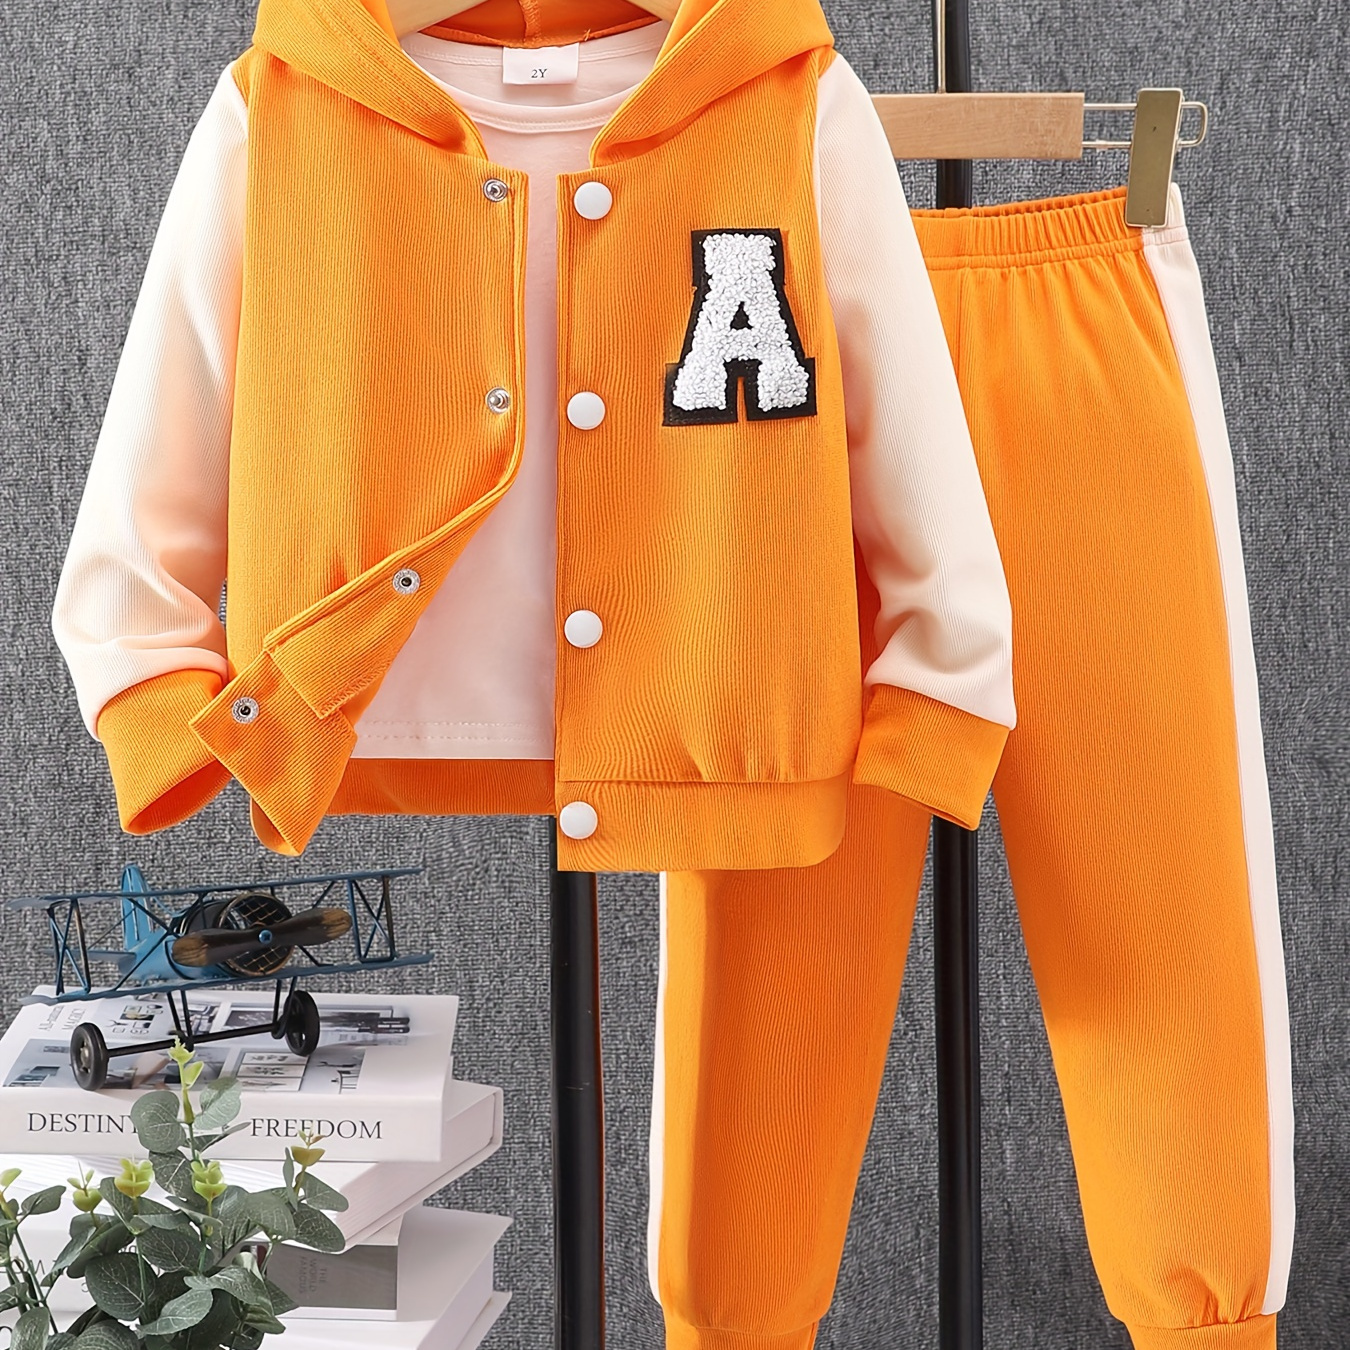 

Toddler Girl's Color Clash Outfit 2pcs, Hooded Varsity Jacket & Corduroy Sweatpants Set, Kid's Clothes For Spring Fall